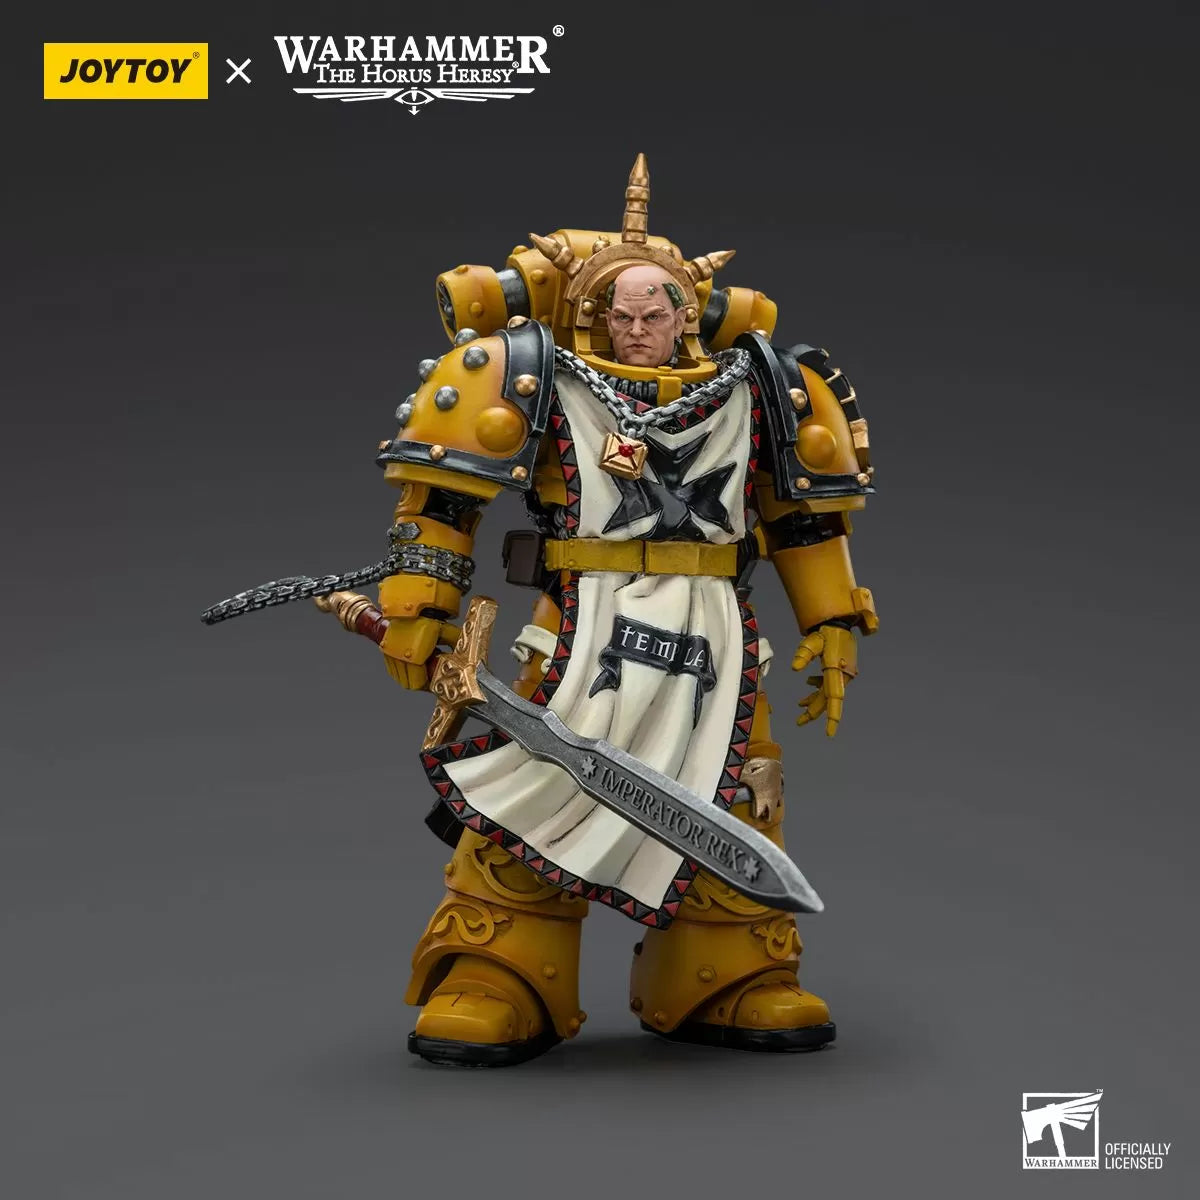 Warhammer Collectibles: 1/18 Scale Imperial Fists Sigismund, First Captain of the Imperial Fists